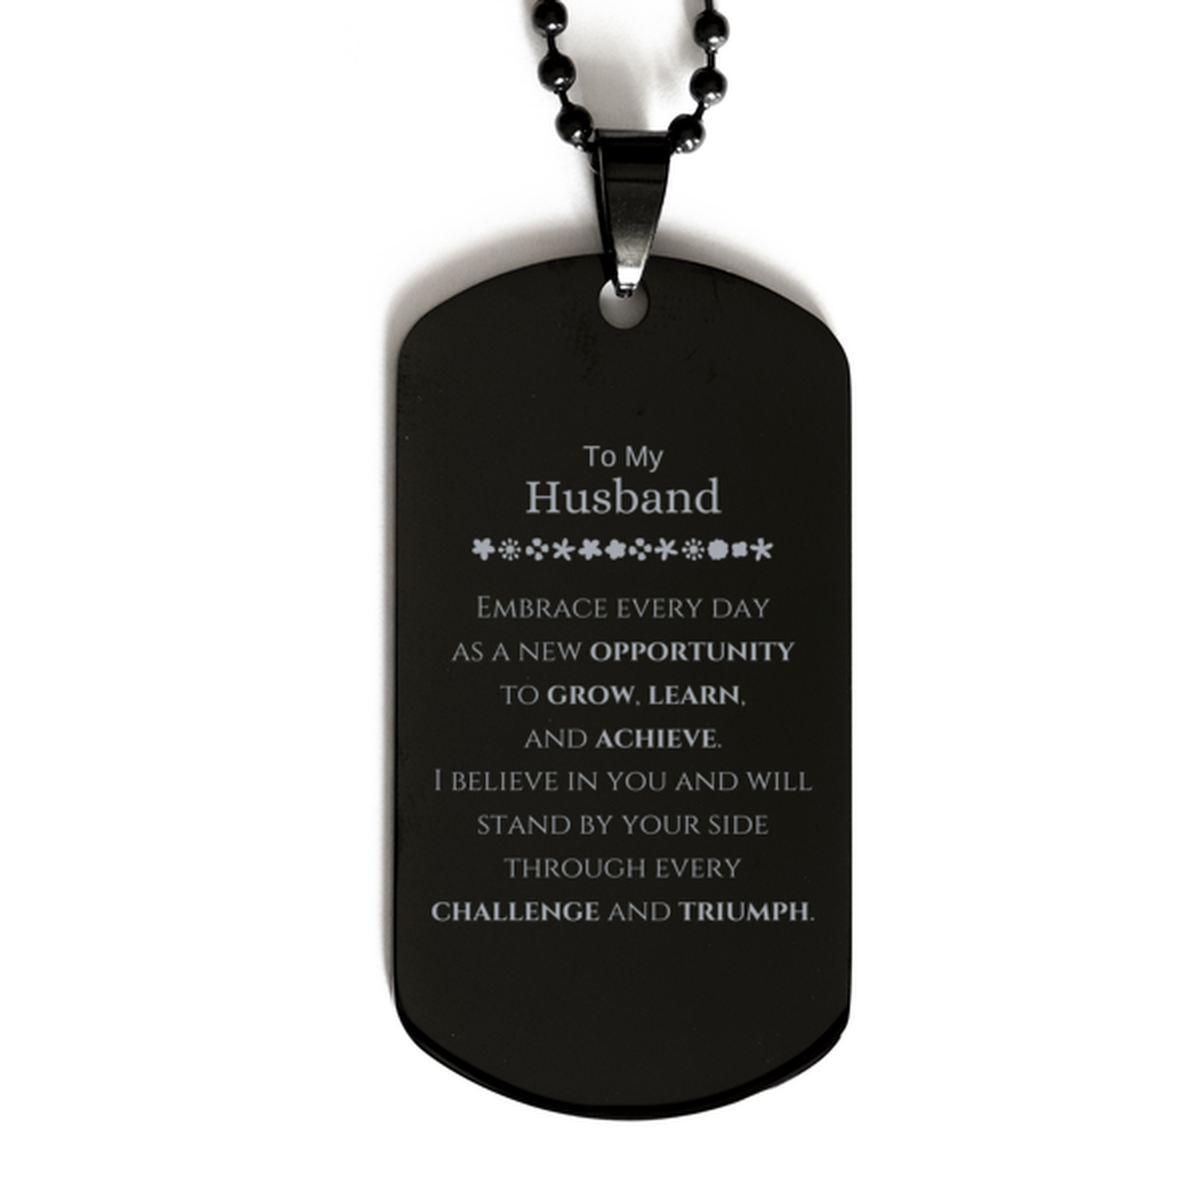 To My Husband Gifts, I believe in you and will stand by your side, Inspirational Black Dog Tag For Husband, Birthday Christmas Motivational Husband Gifts